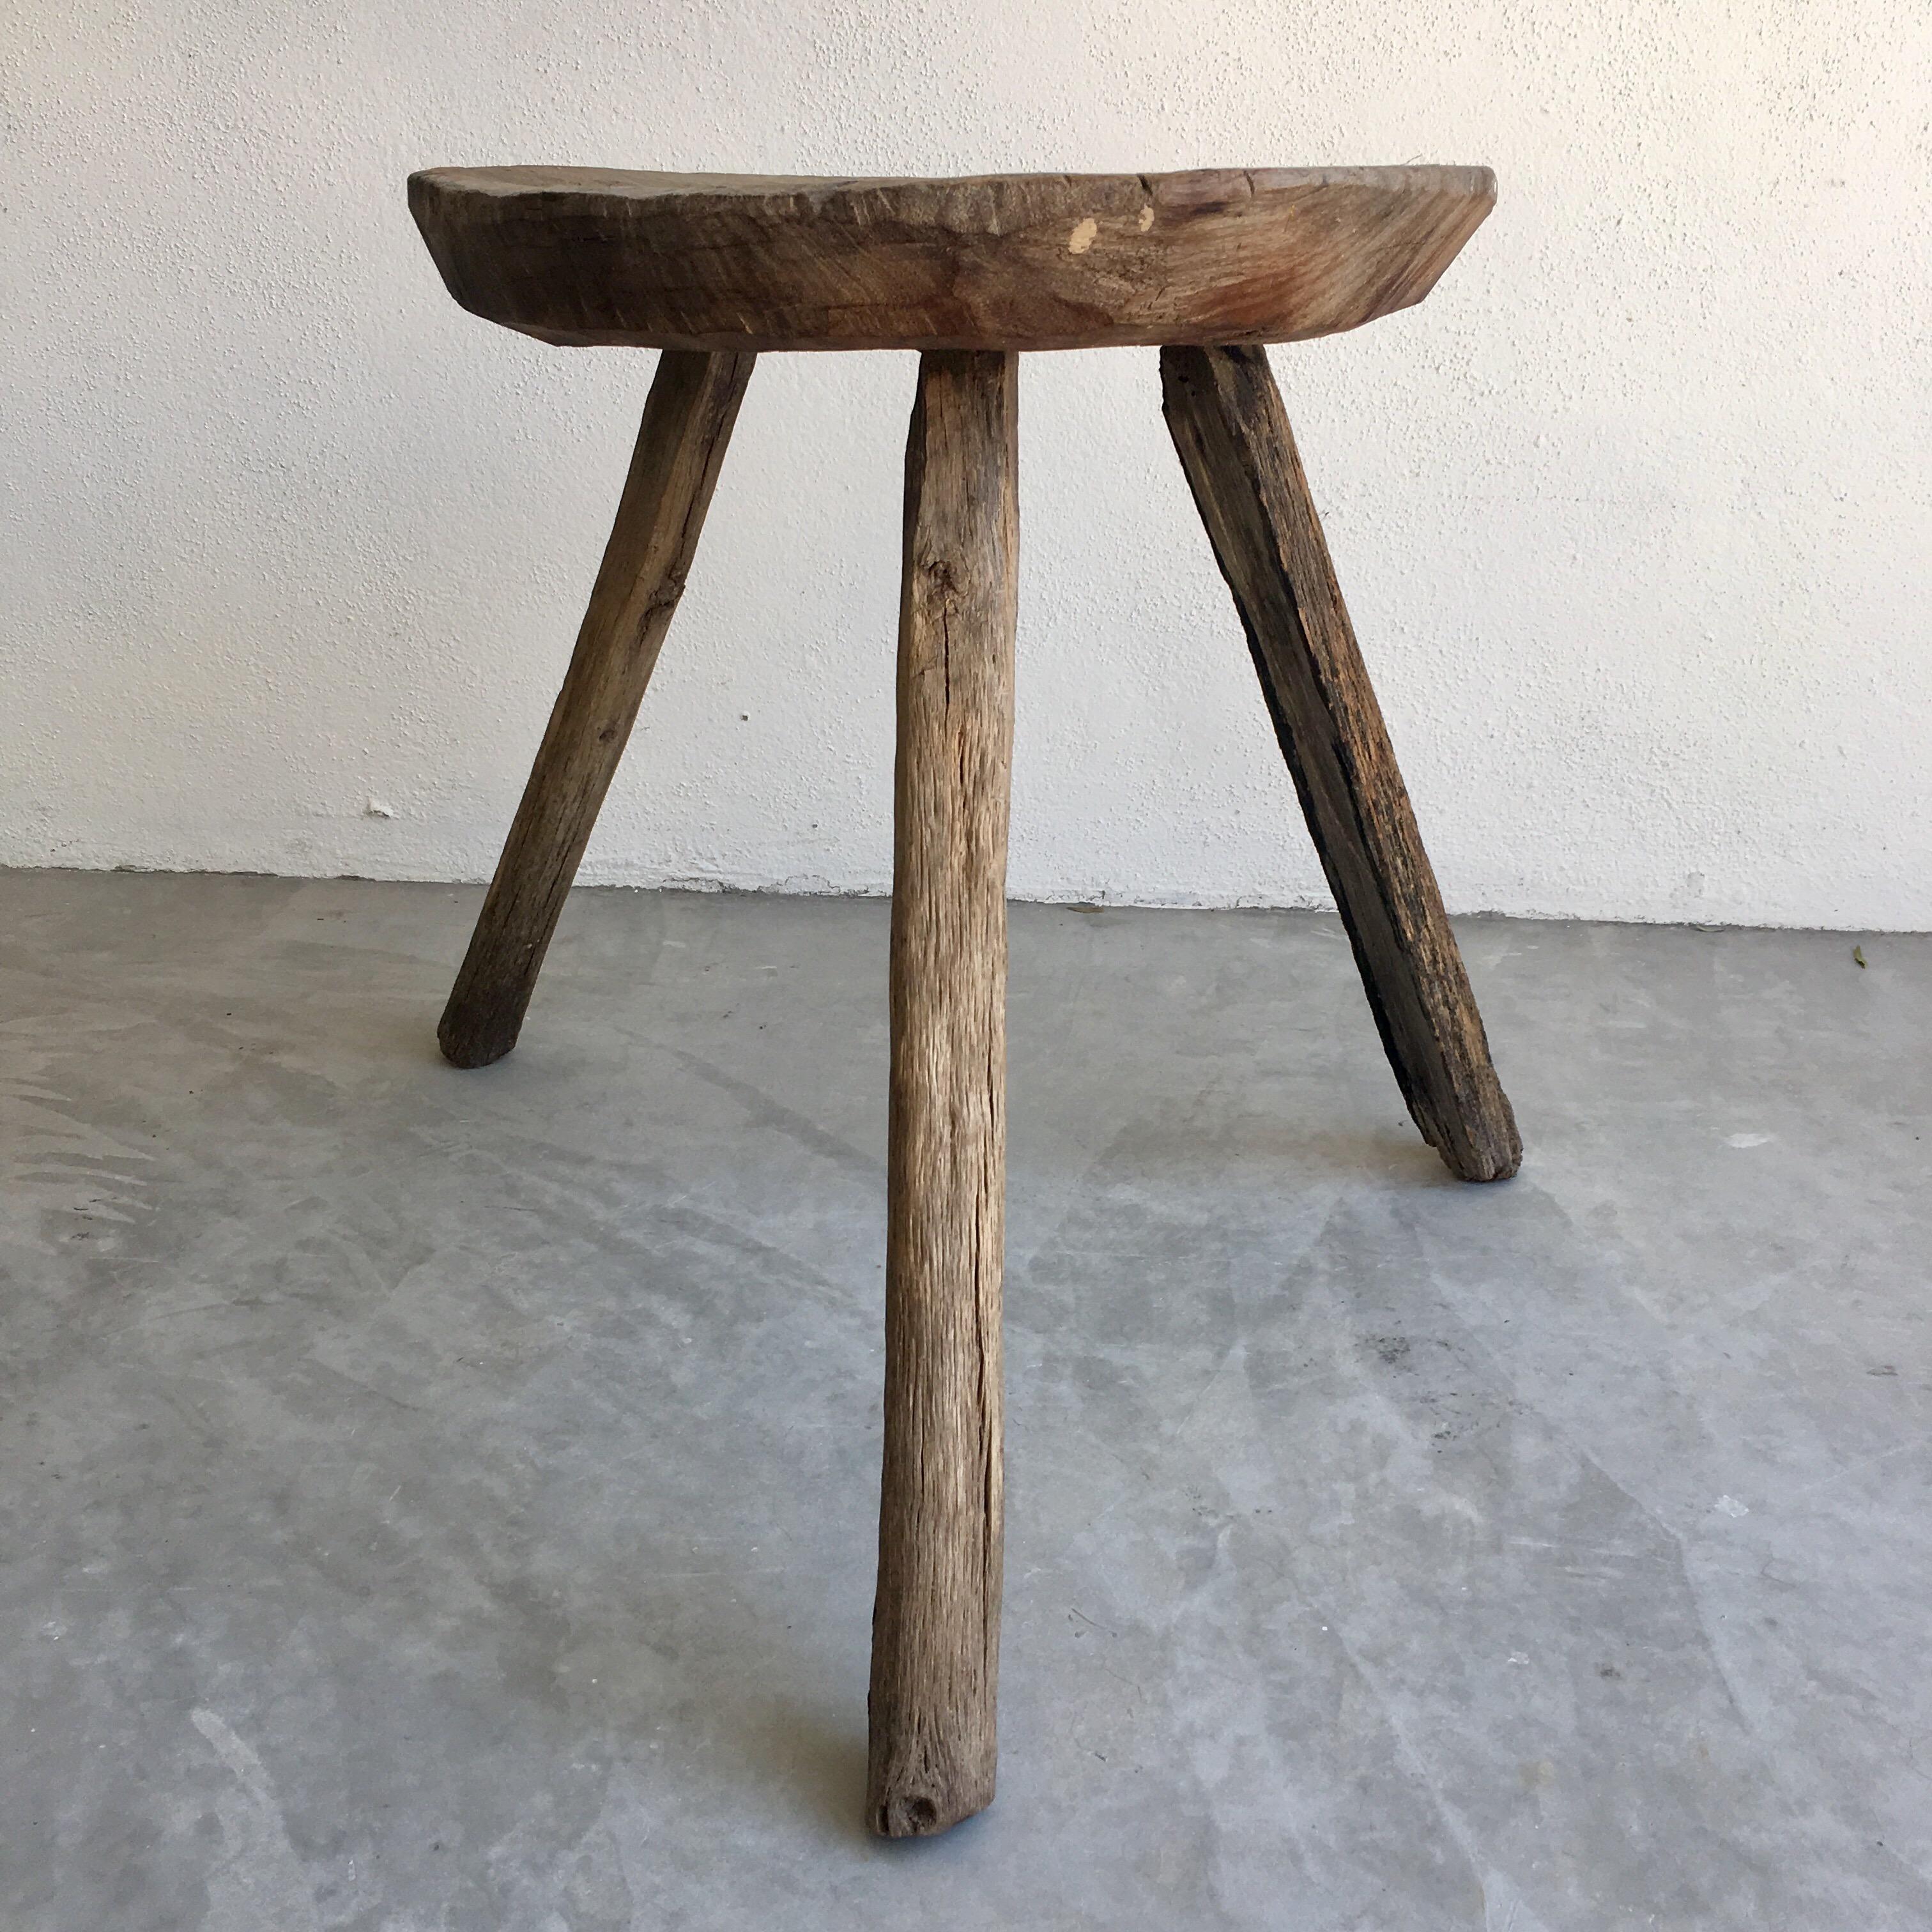 Hand-Carved Mesquite Stool from Mexico